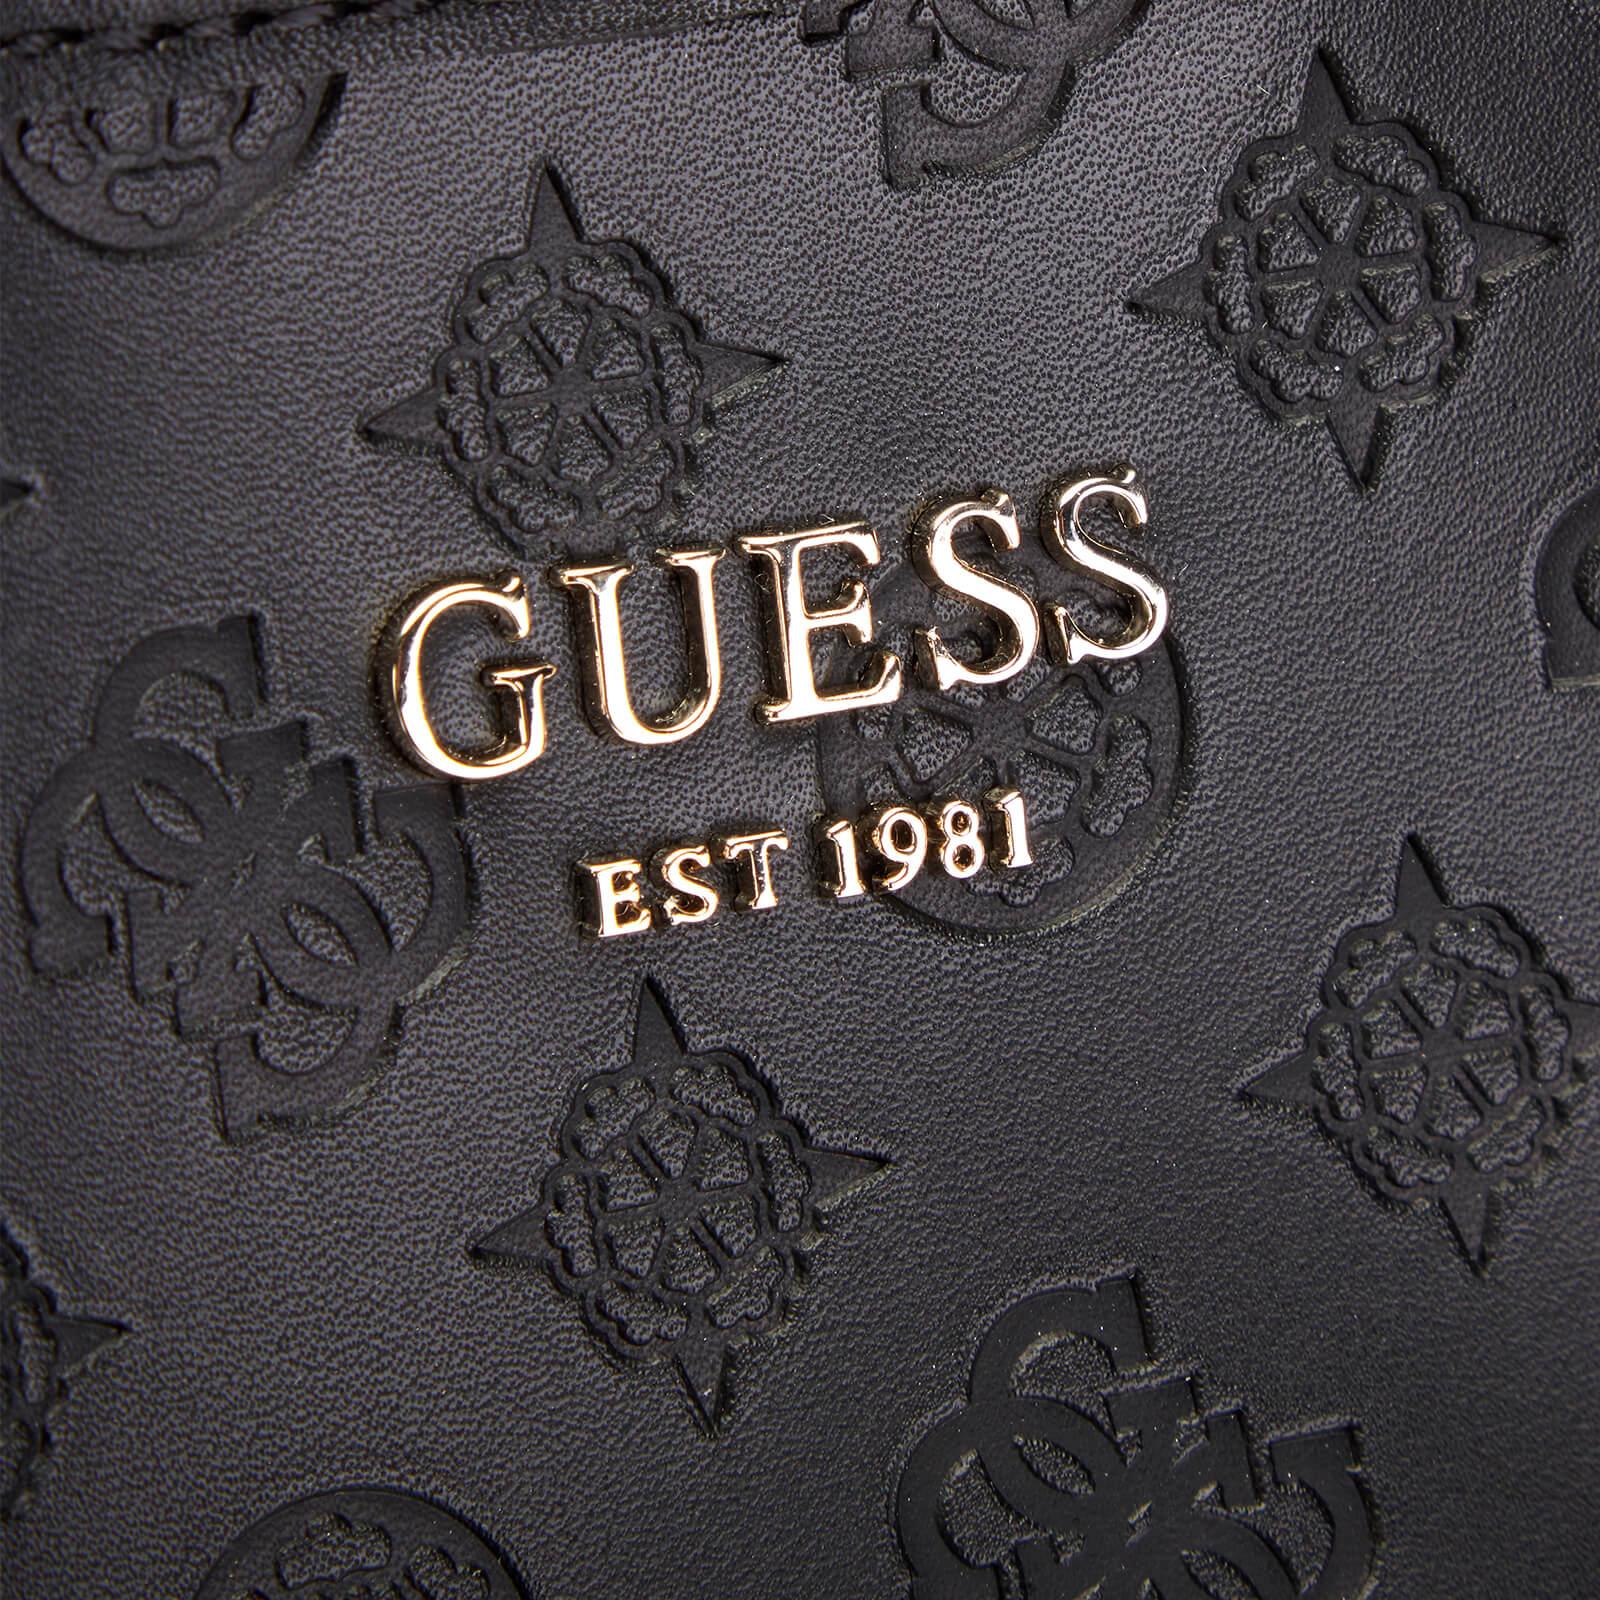 GUESS Vikky Large Tote